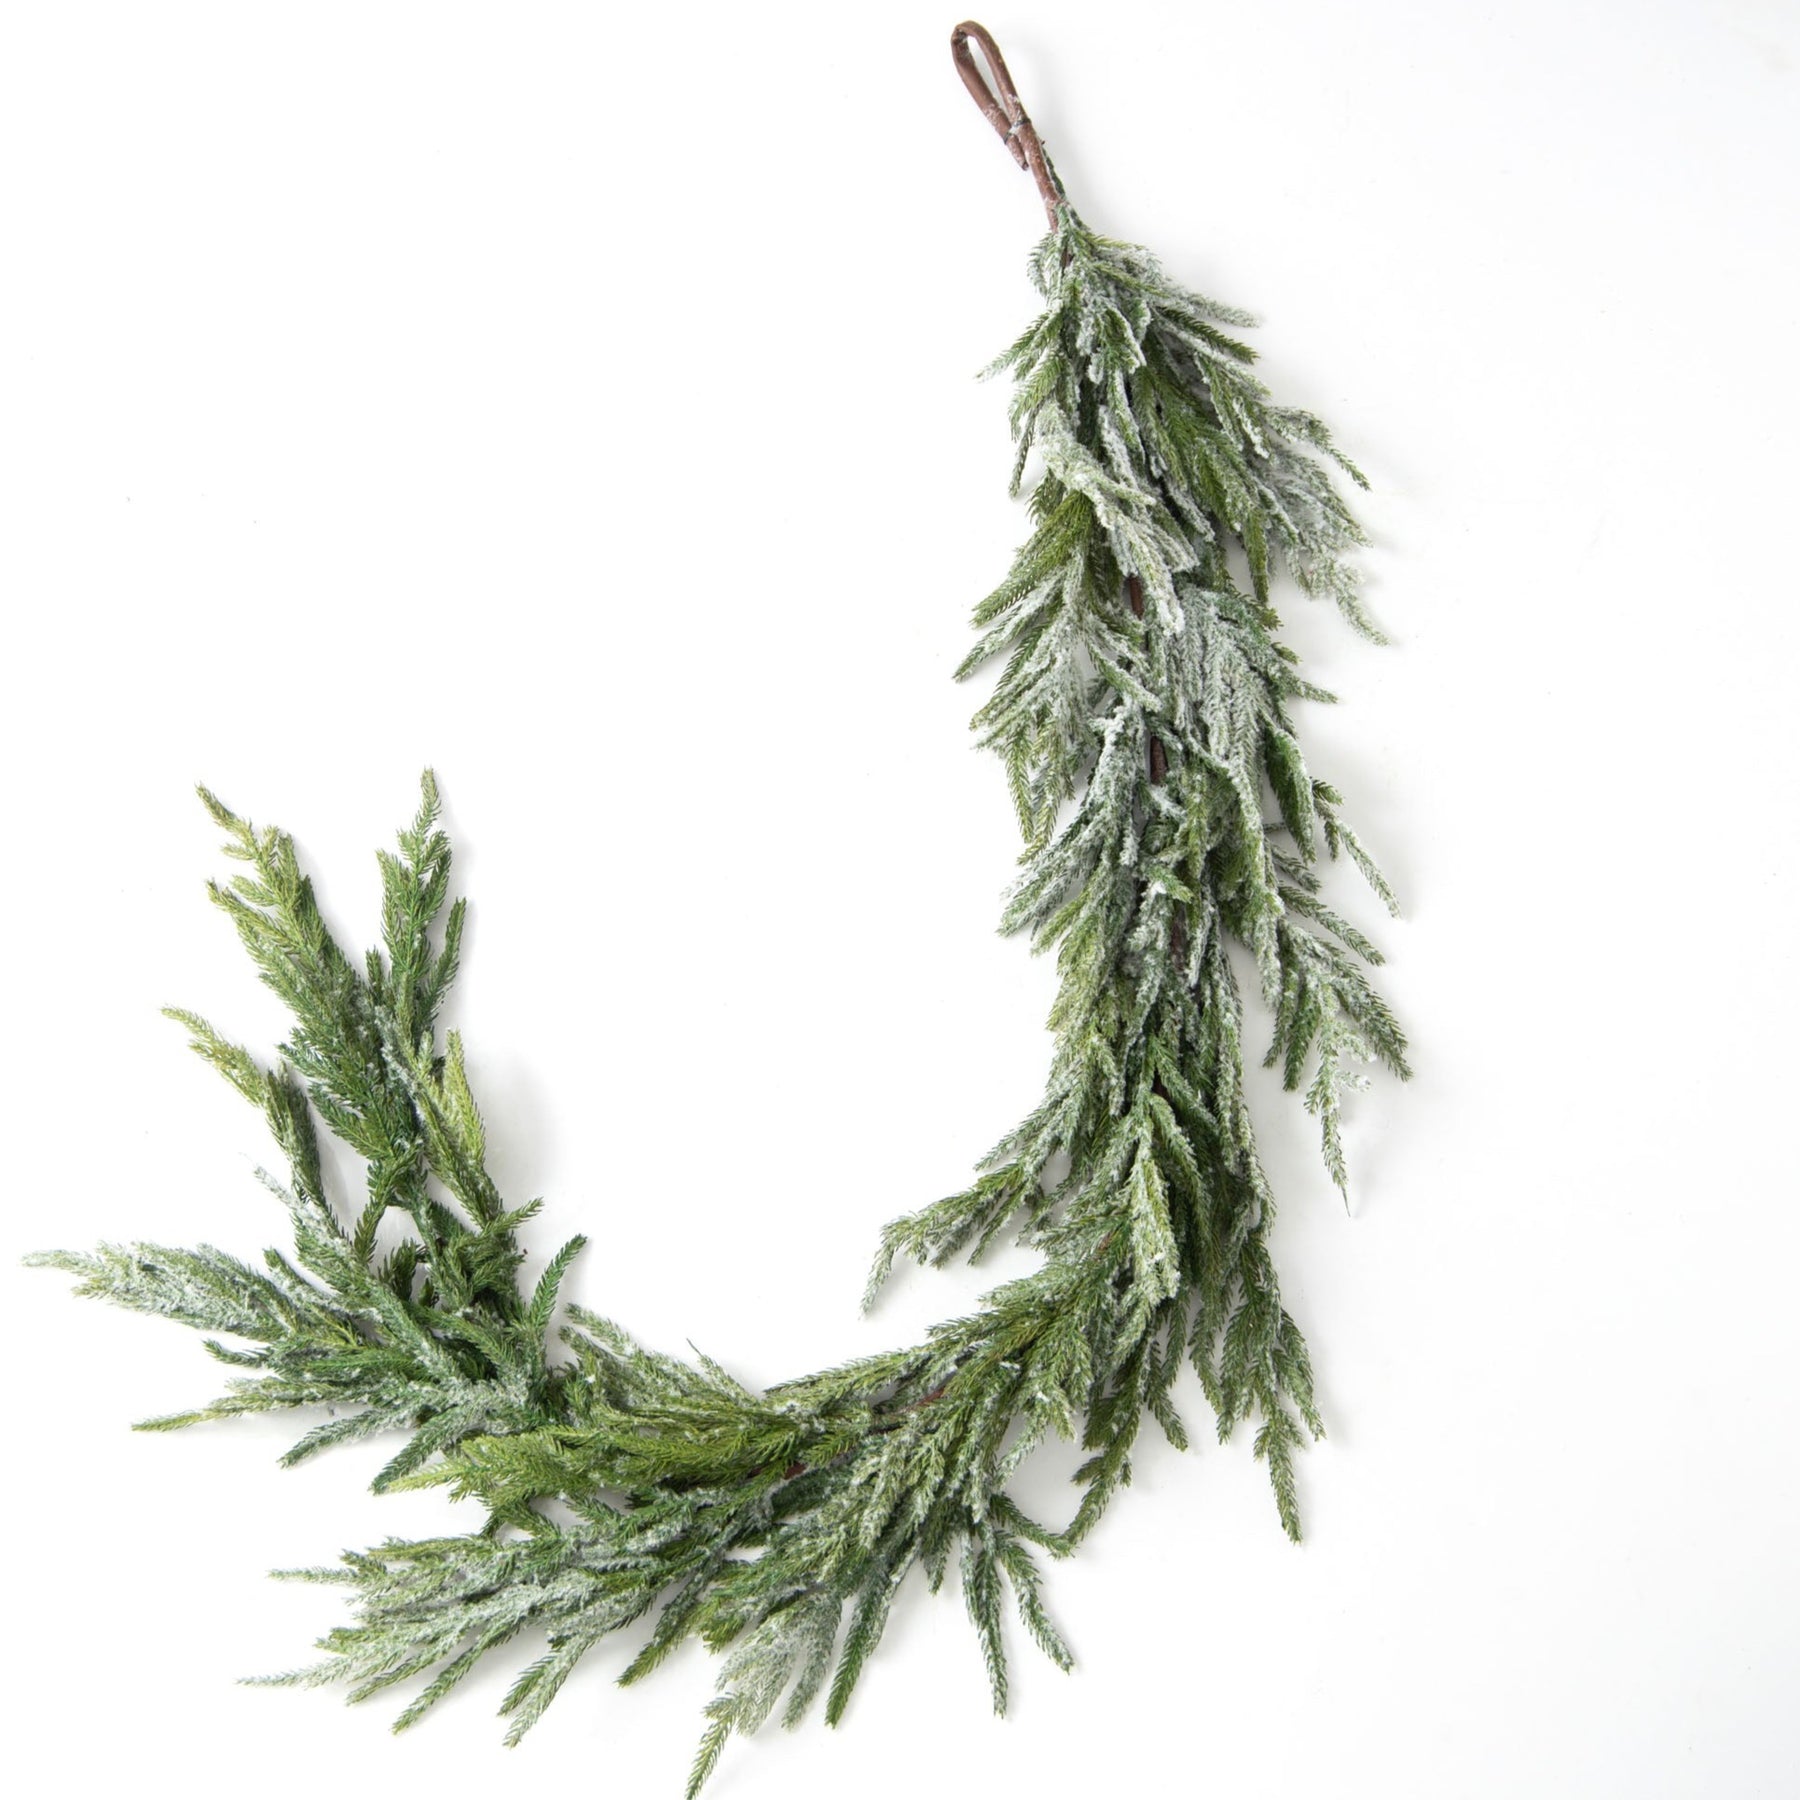 Iced Winter Pine & Eucalyptus with Country Twig Shimmering Holiday Arr –  Darby Creek Trading